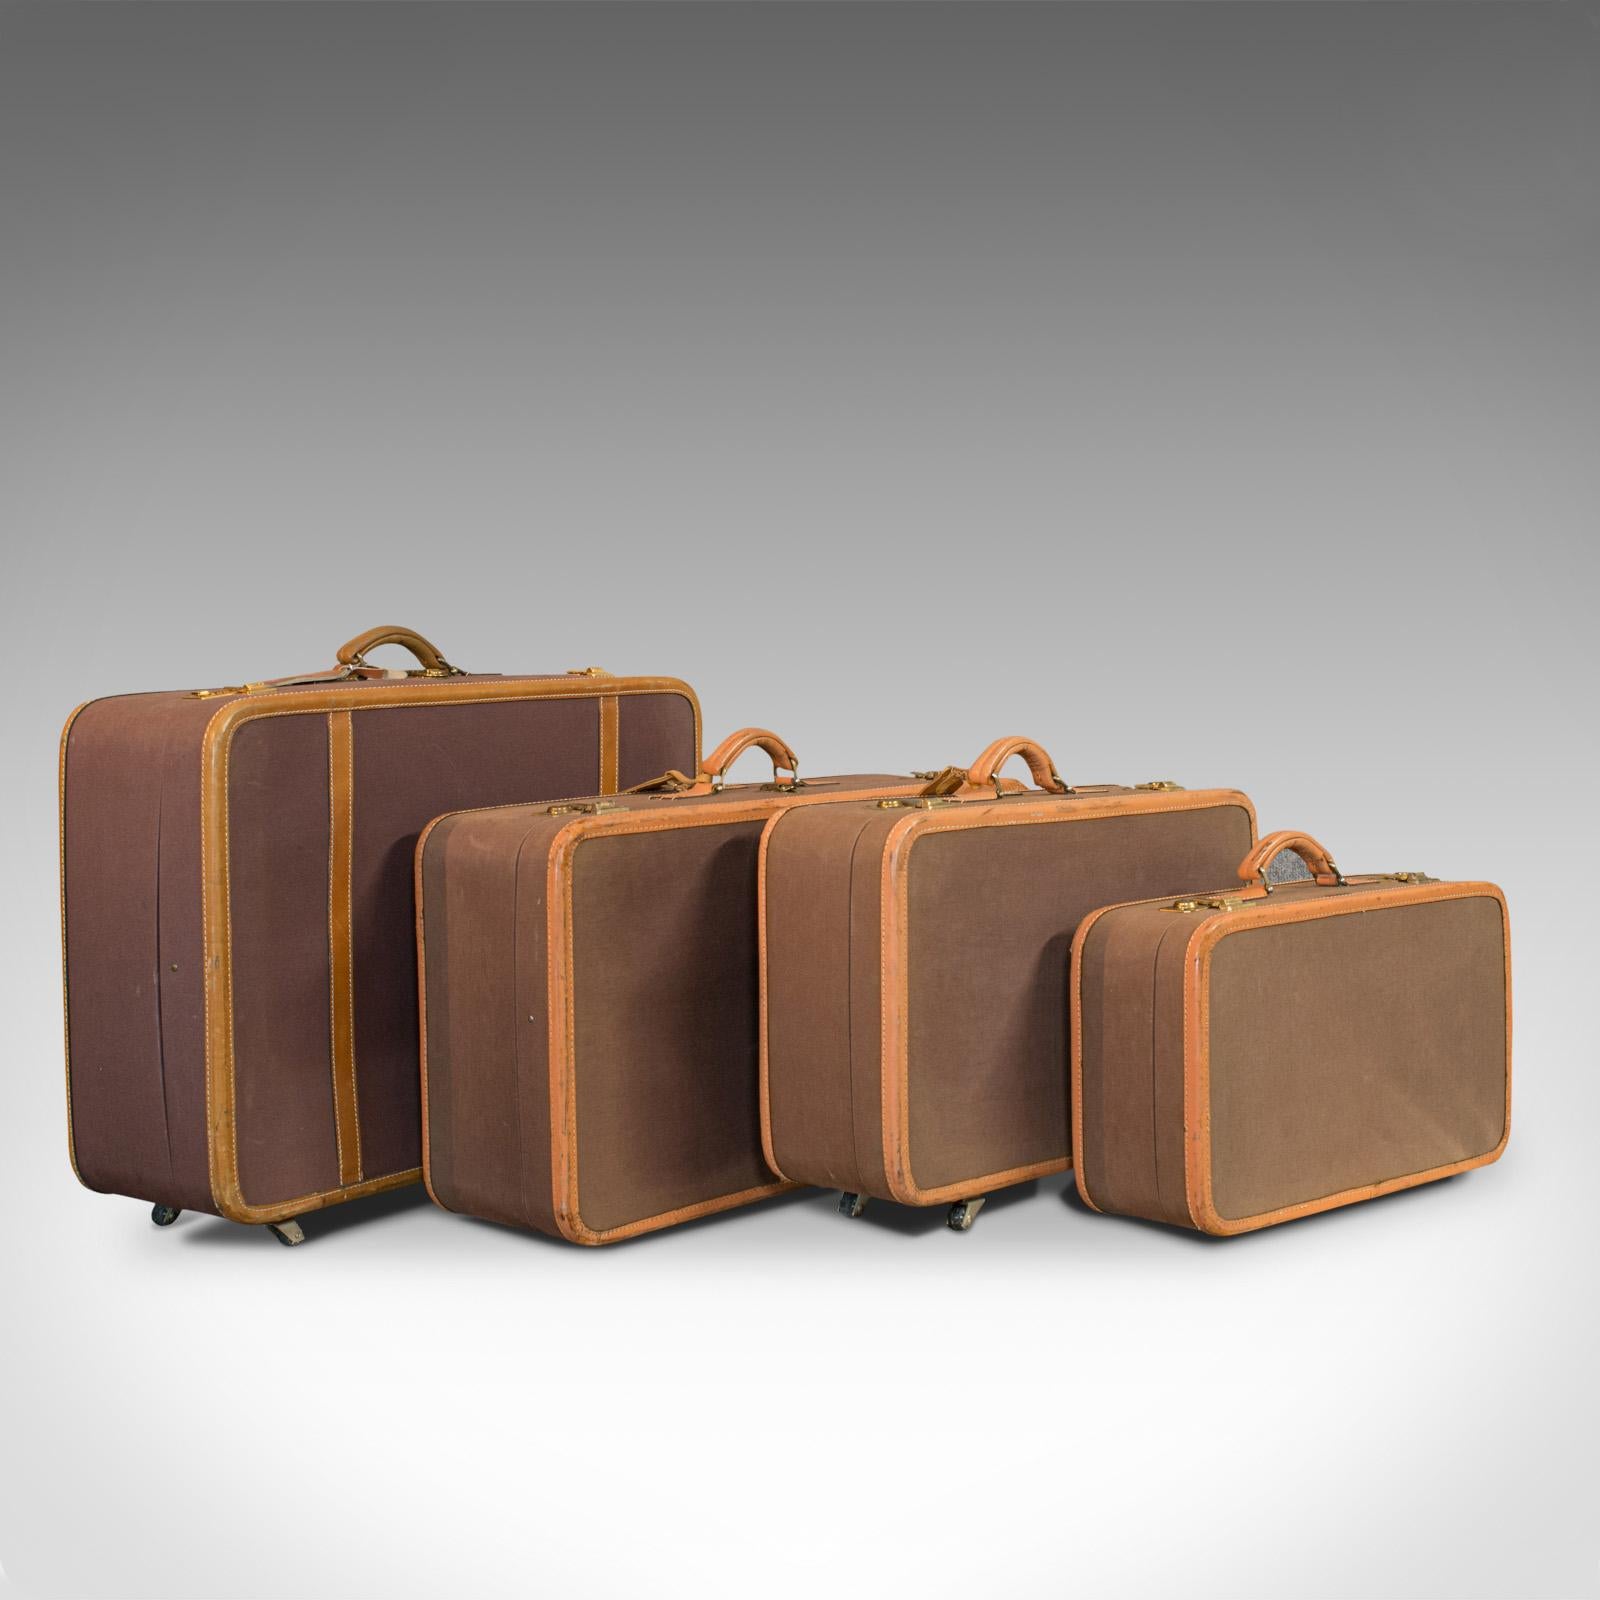 This is a vintage luggage set. An American, leather and canvas set of 4 suitcases by T. Anthony of New York, dating to the late 20th century, circa 1970.

Luxury American cases, favoured by the jet set
Displaying a desirable aged patina
Leather